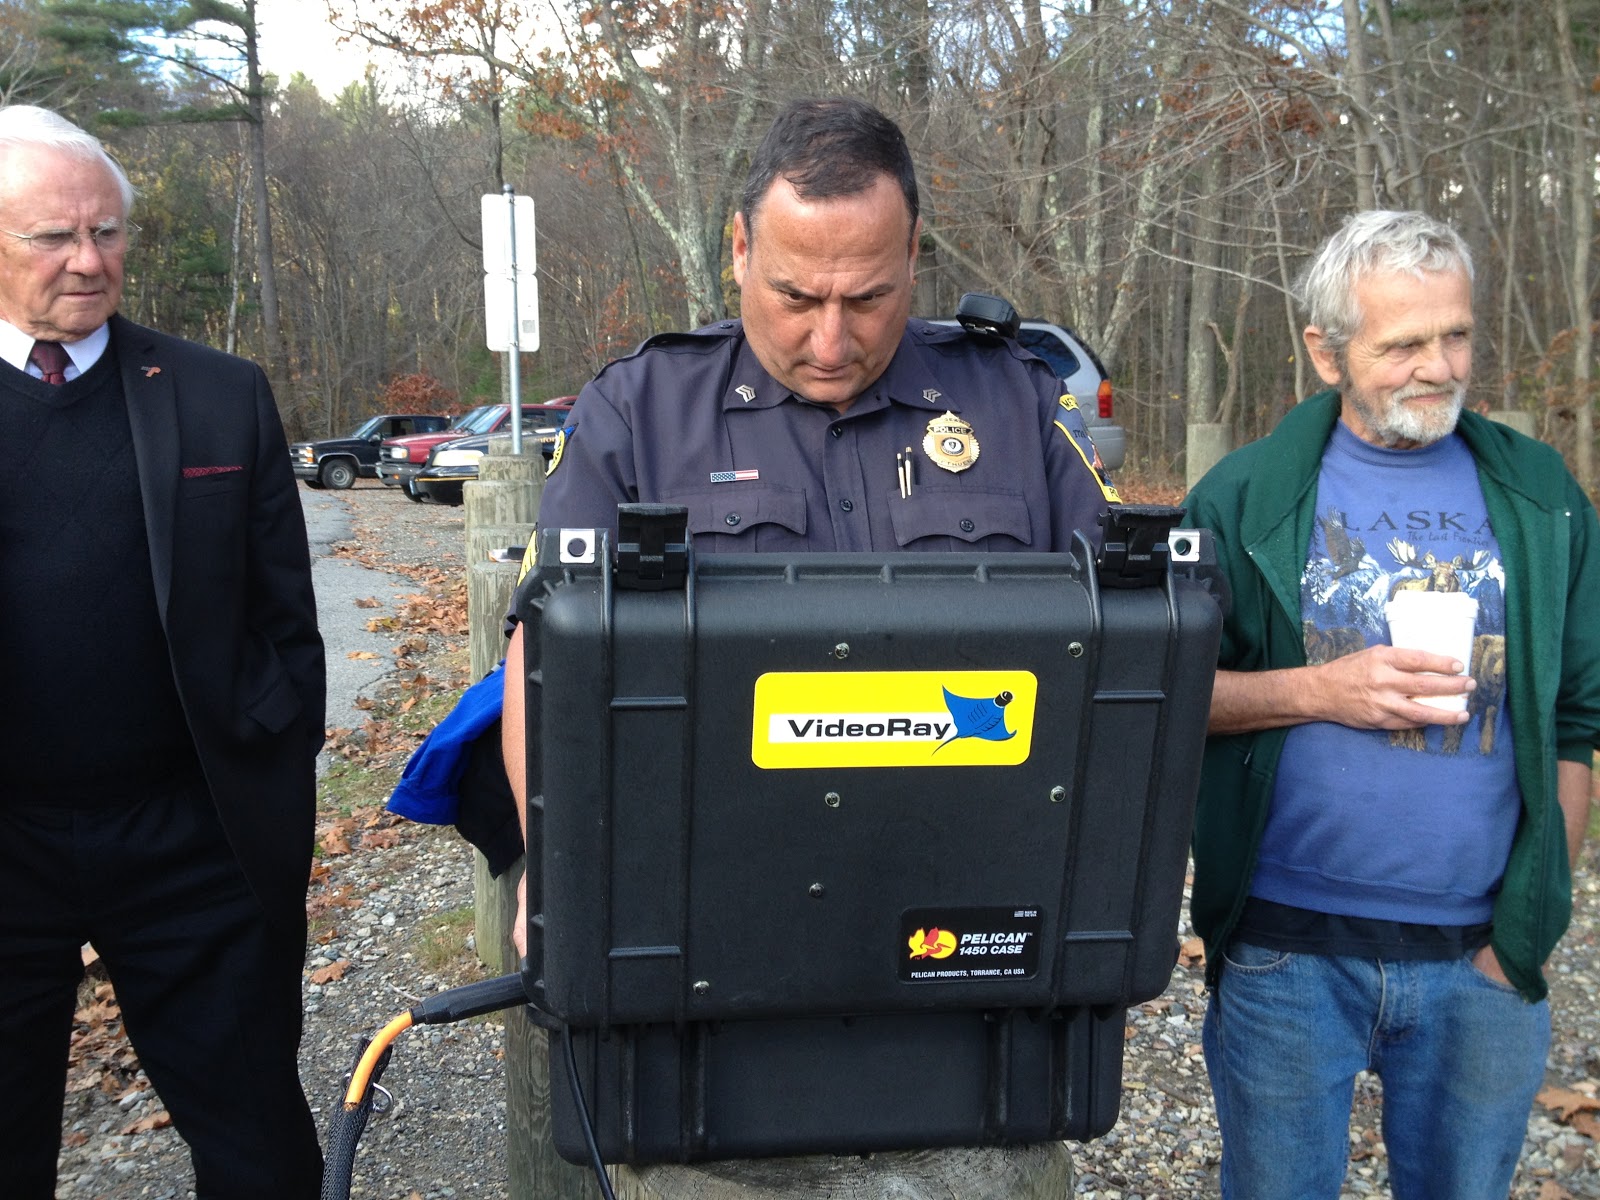 Methuen Police Now Have Remote Submarine for Search and Rescue